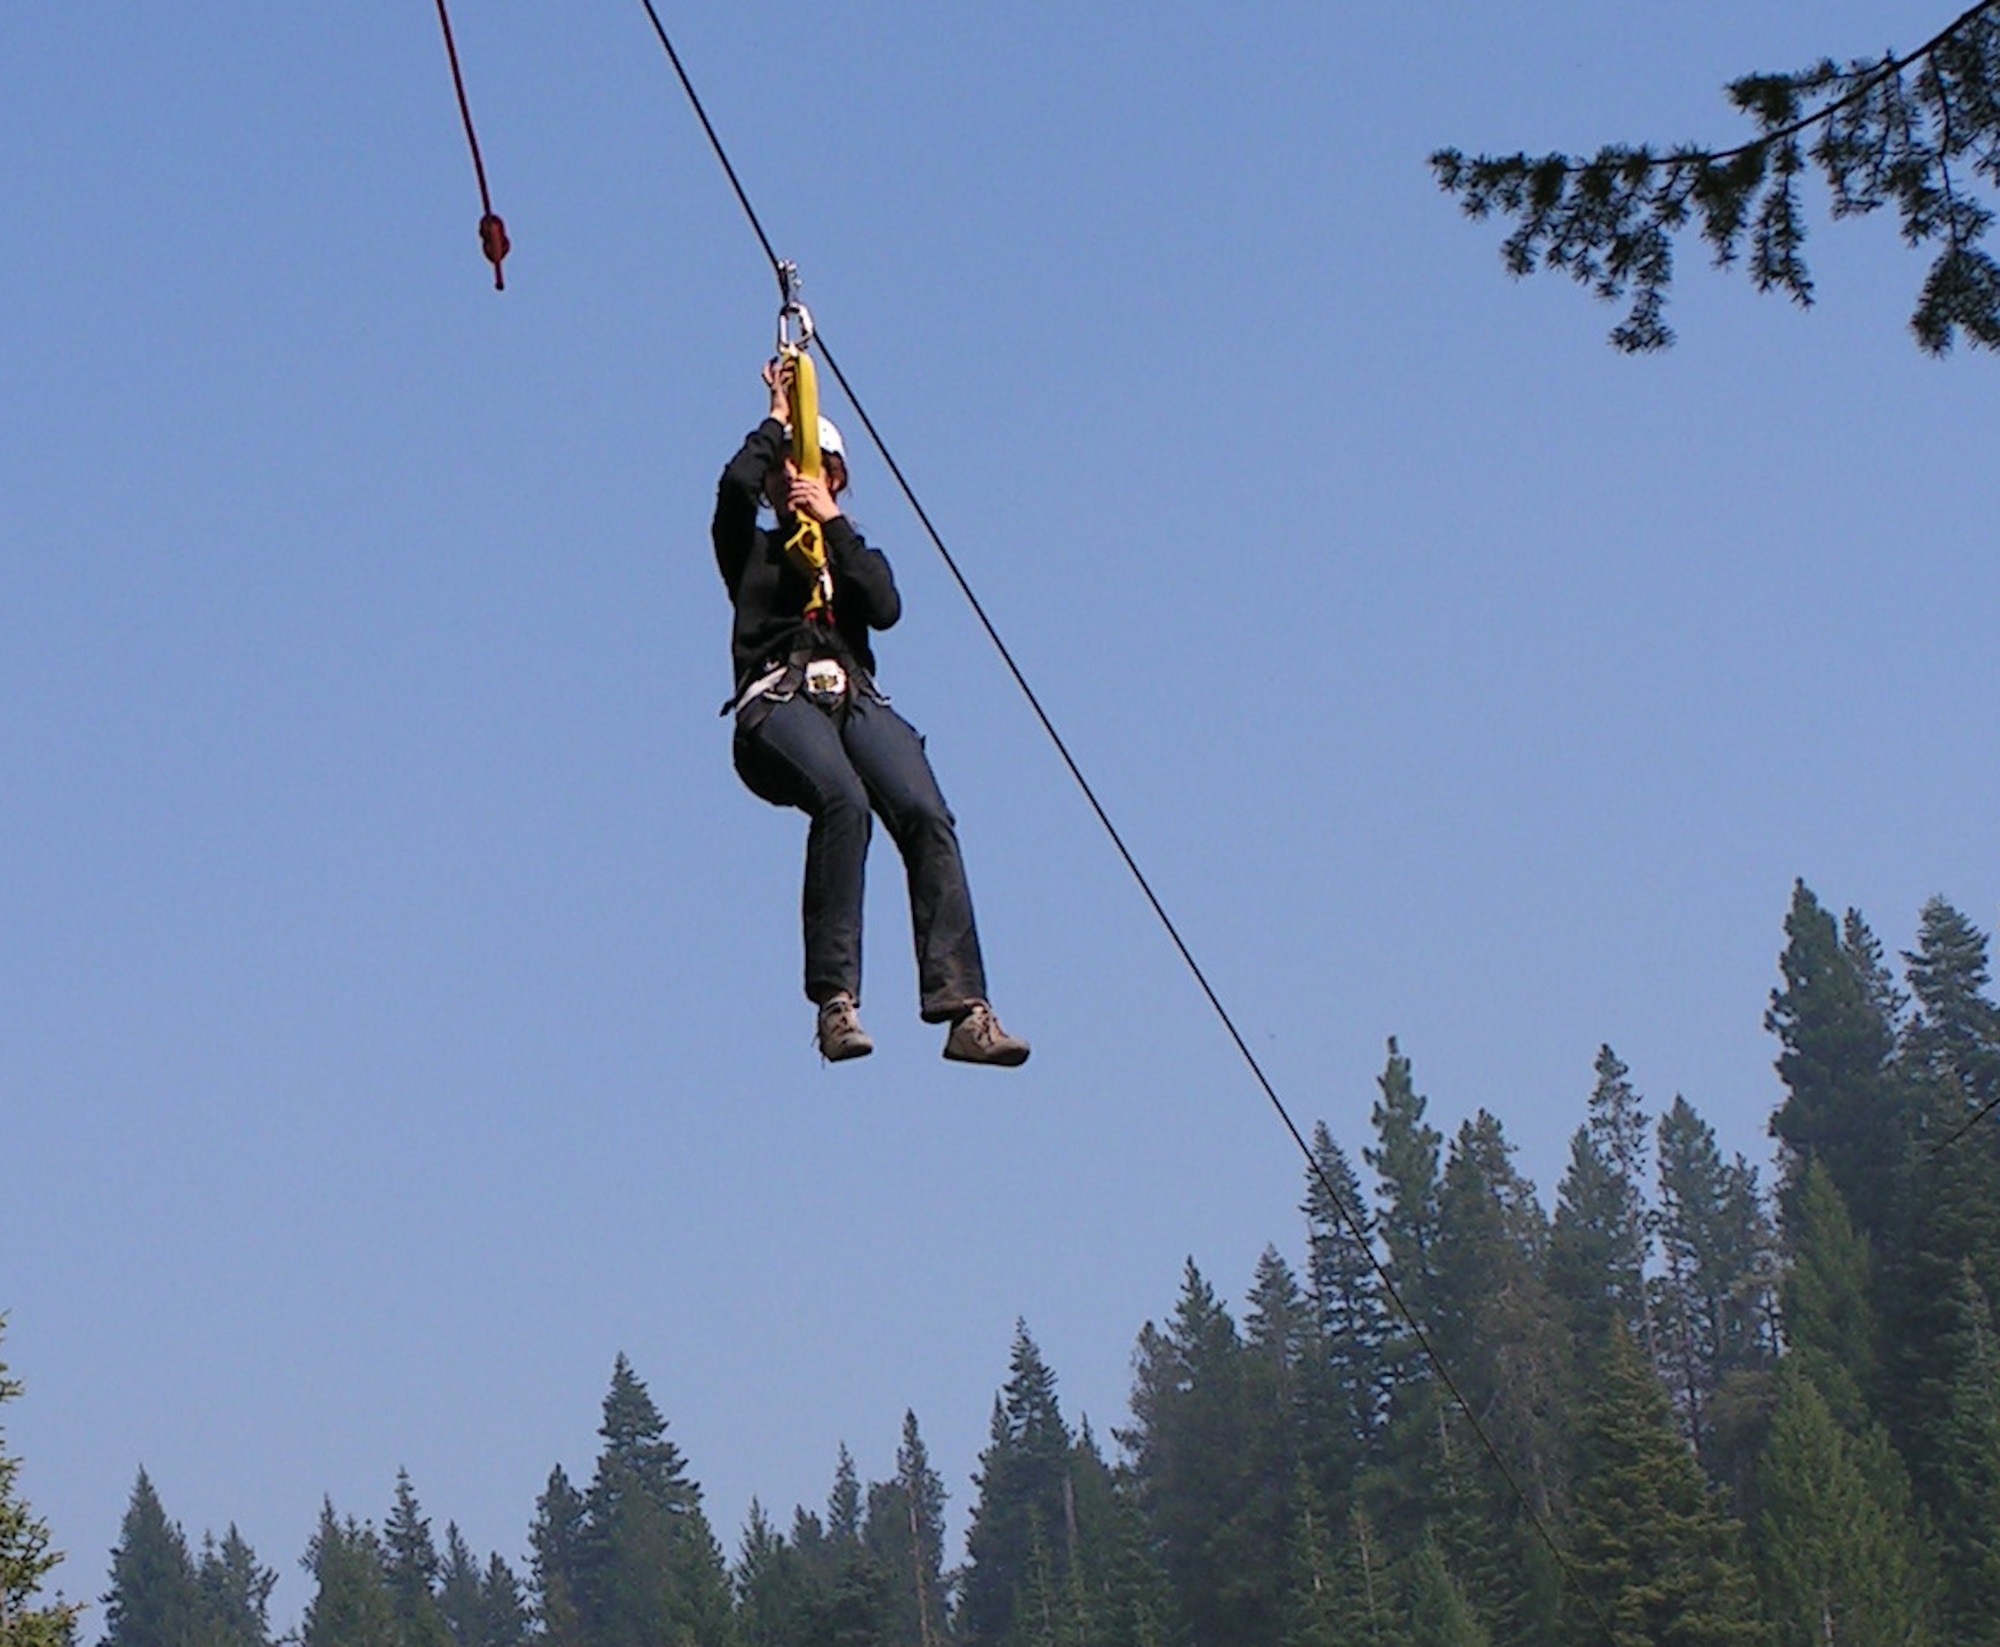 MOUNTAIN HOME AIR FORCE BASE, Idaho -- A camper participating in Operation Purple Camp Idaho, a camp exclusively for military children, rides down a zip line. During the week-long camp, the campers stayed at Cascade Lake campground, participated in whitewater rafting, zip line tour, rock climbing, horseback riding, bowling and ice skating in between life lessons taught by the counselors. The life lessons helped campers adapt to parent’s deployments and family reintegration. (U.S. Air Force photo)